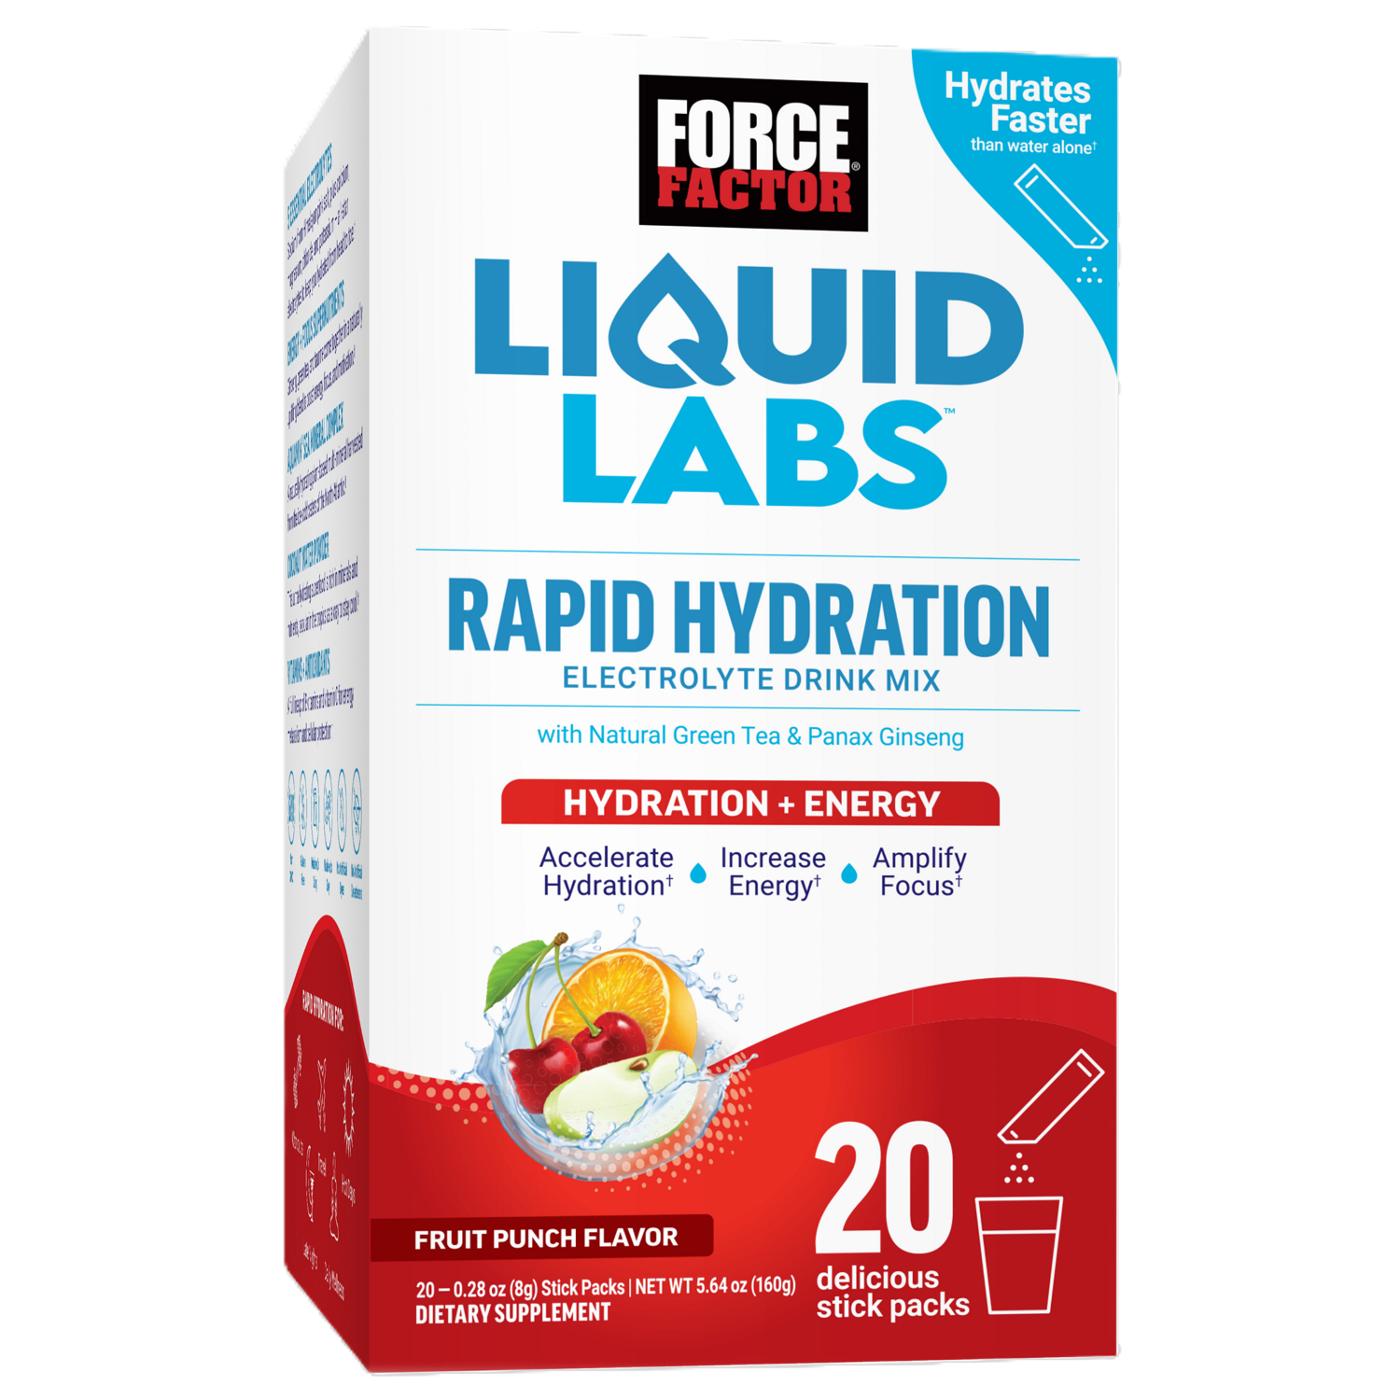 Force Factor Liquid Labs Rapid Hydration Electrolyte Drink Mix Stick Packs - Fruit Punch; image 1 of 5